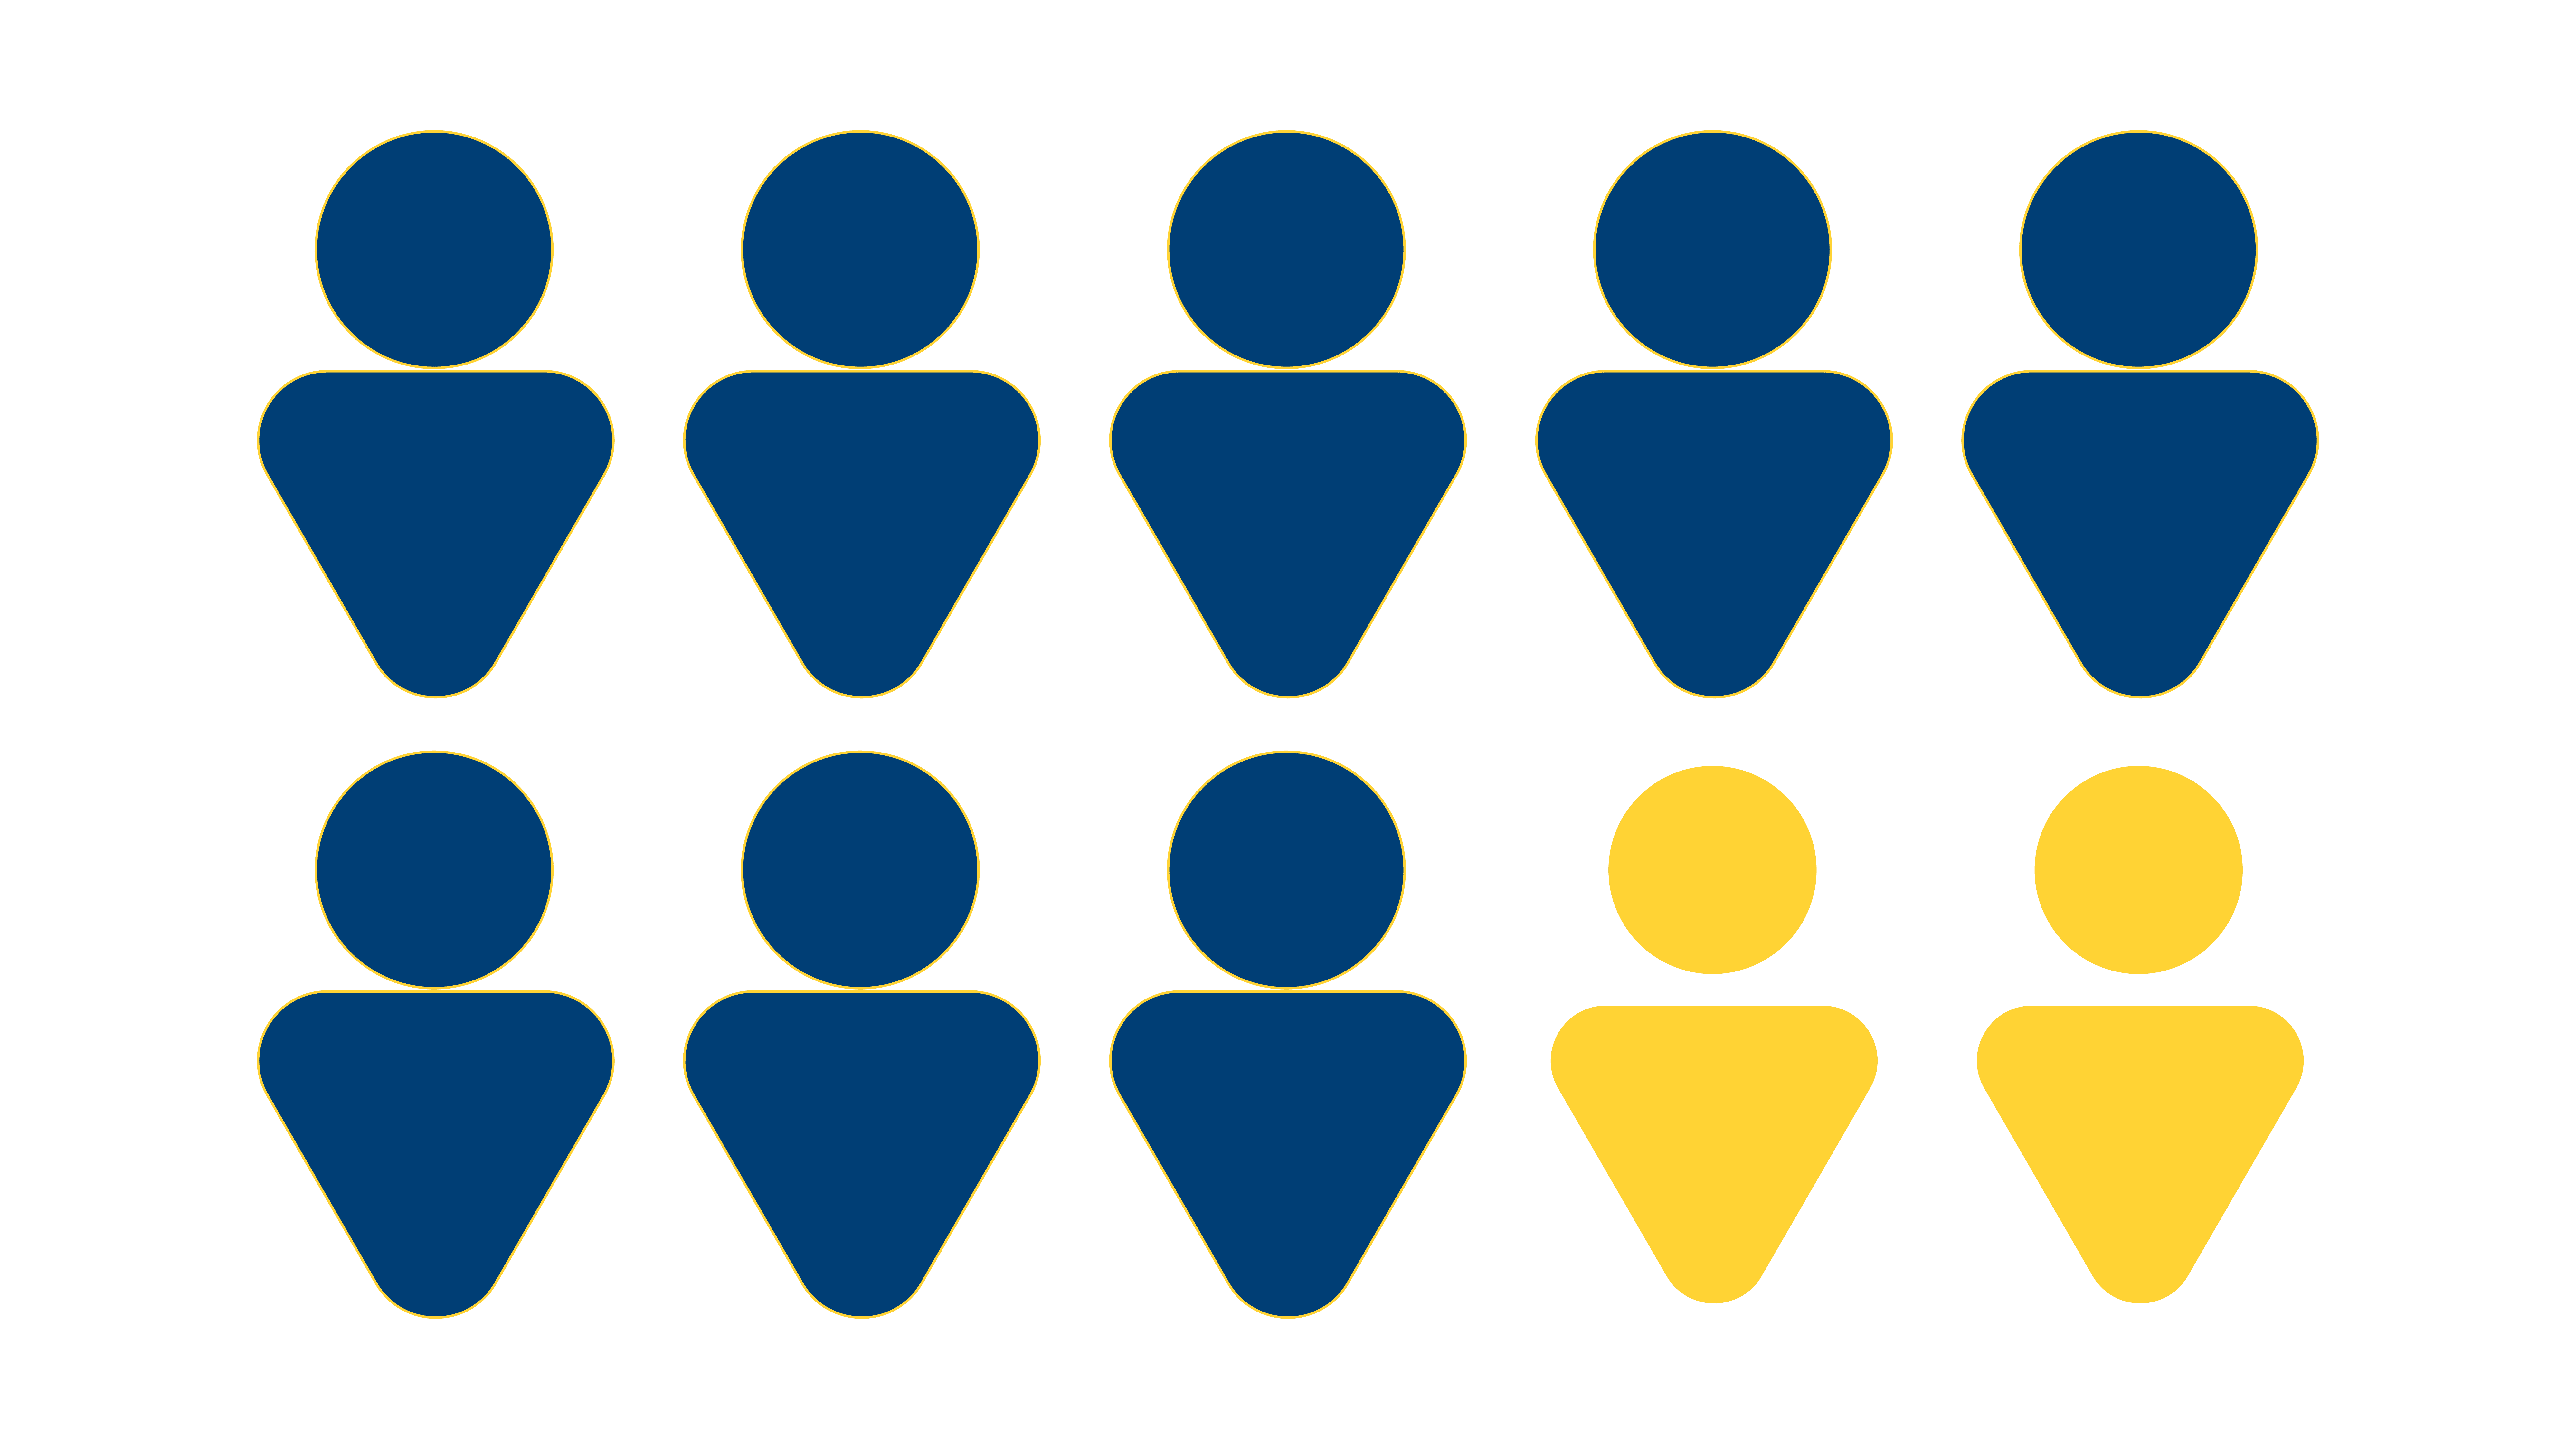 Graphic shows 10 person icons, representing 10 families, 8 of the 10 are in blue, 2 are in yellow, showing that over 8 in 10 families at Noble Schools have at least one trusted staff member at their child’s school.